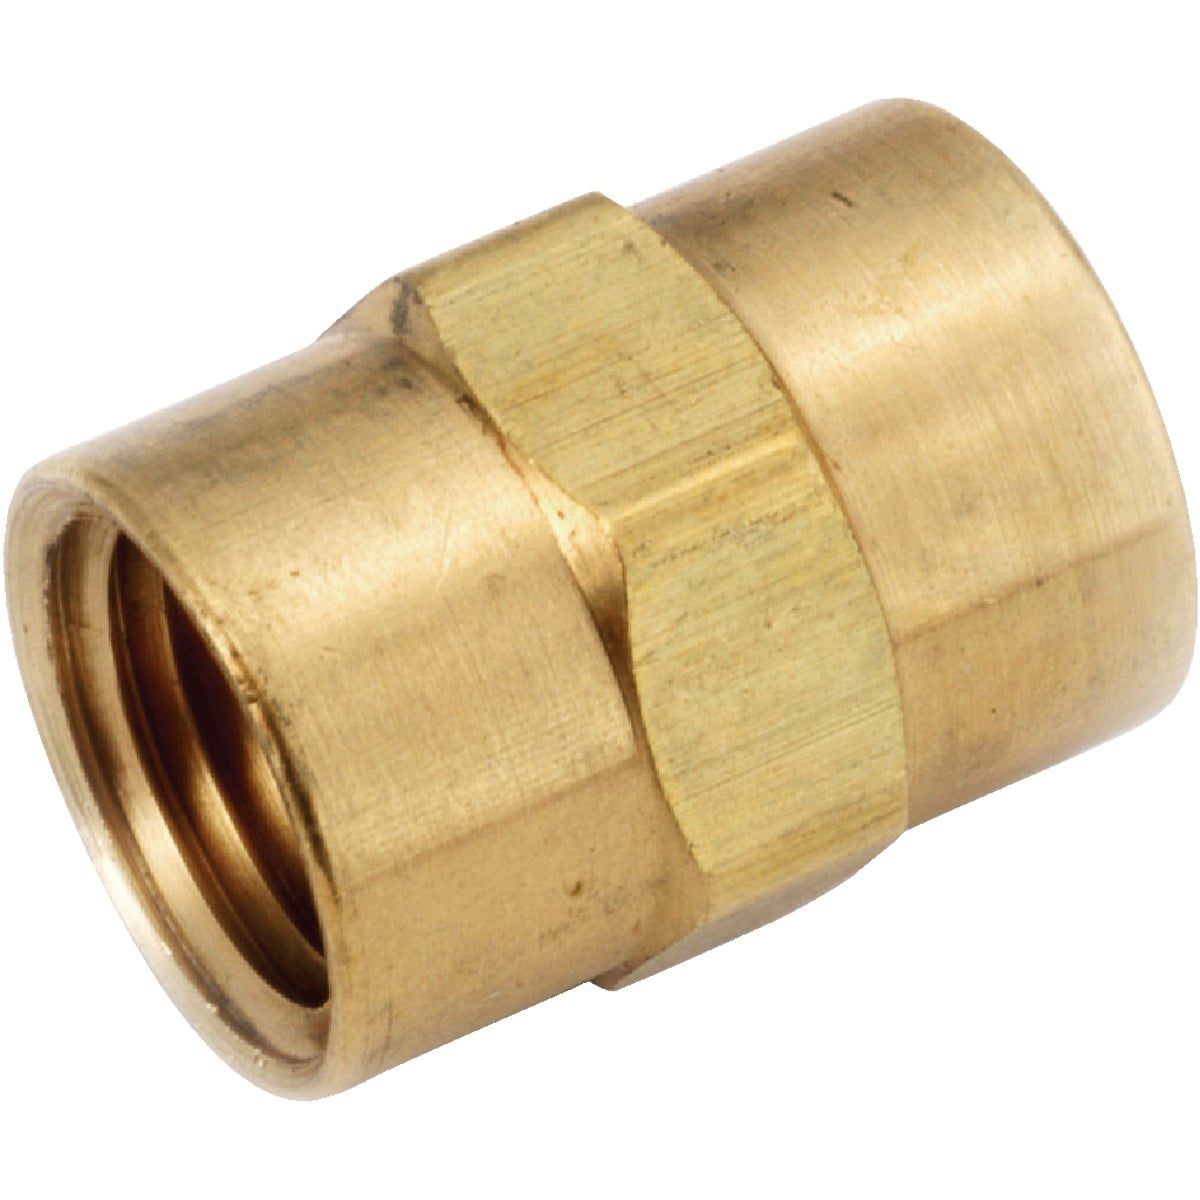 Anderson Metals 1/4 In. Yellow Brass Coupling